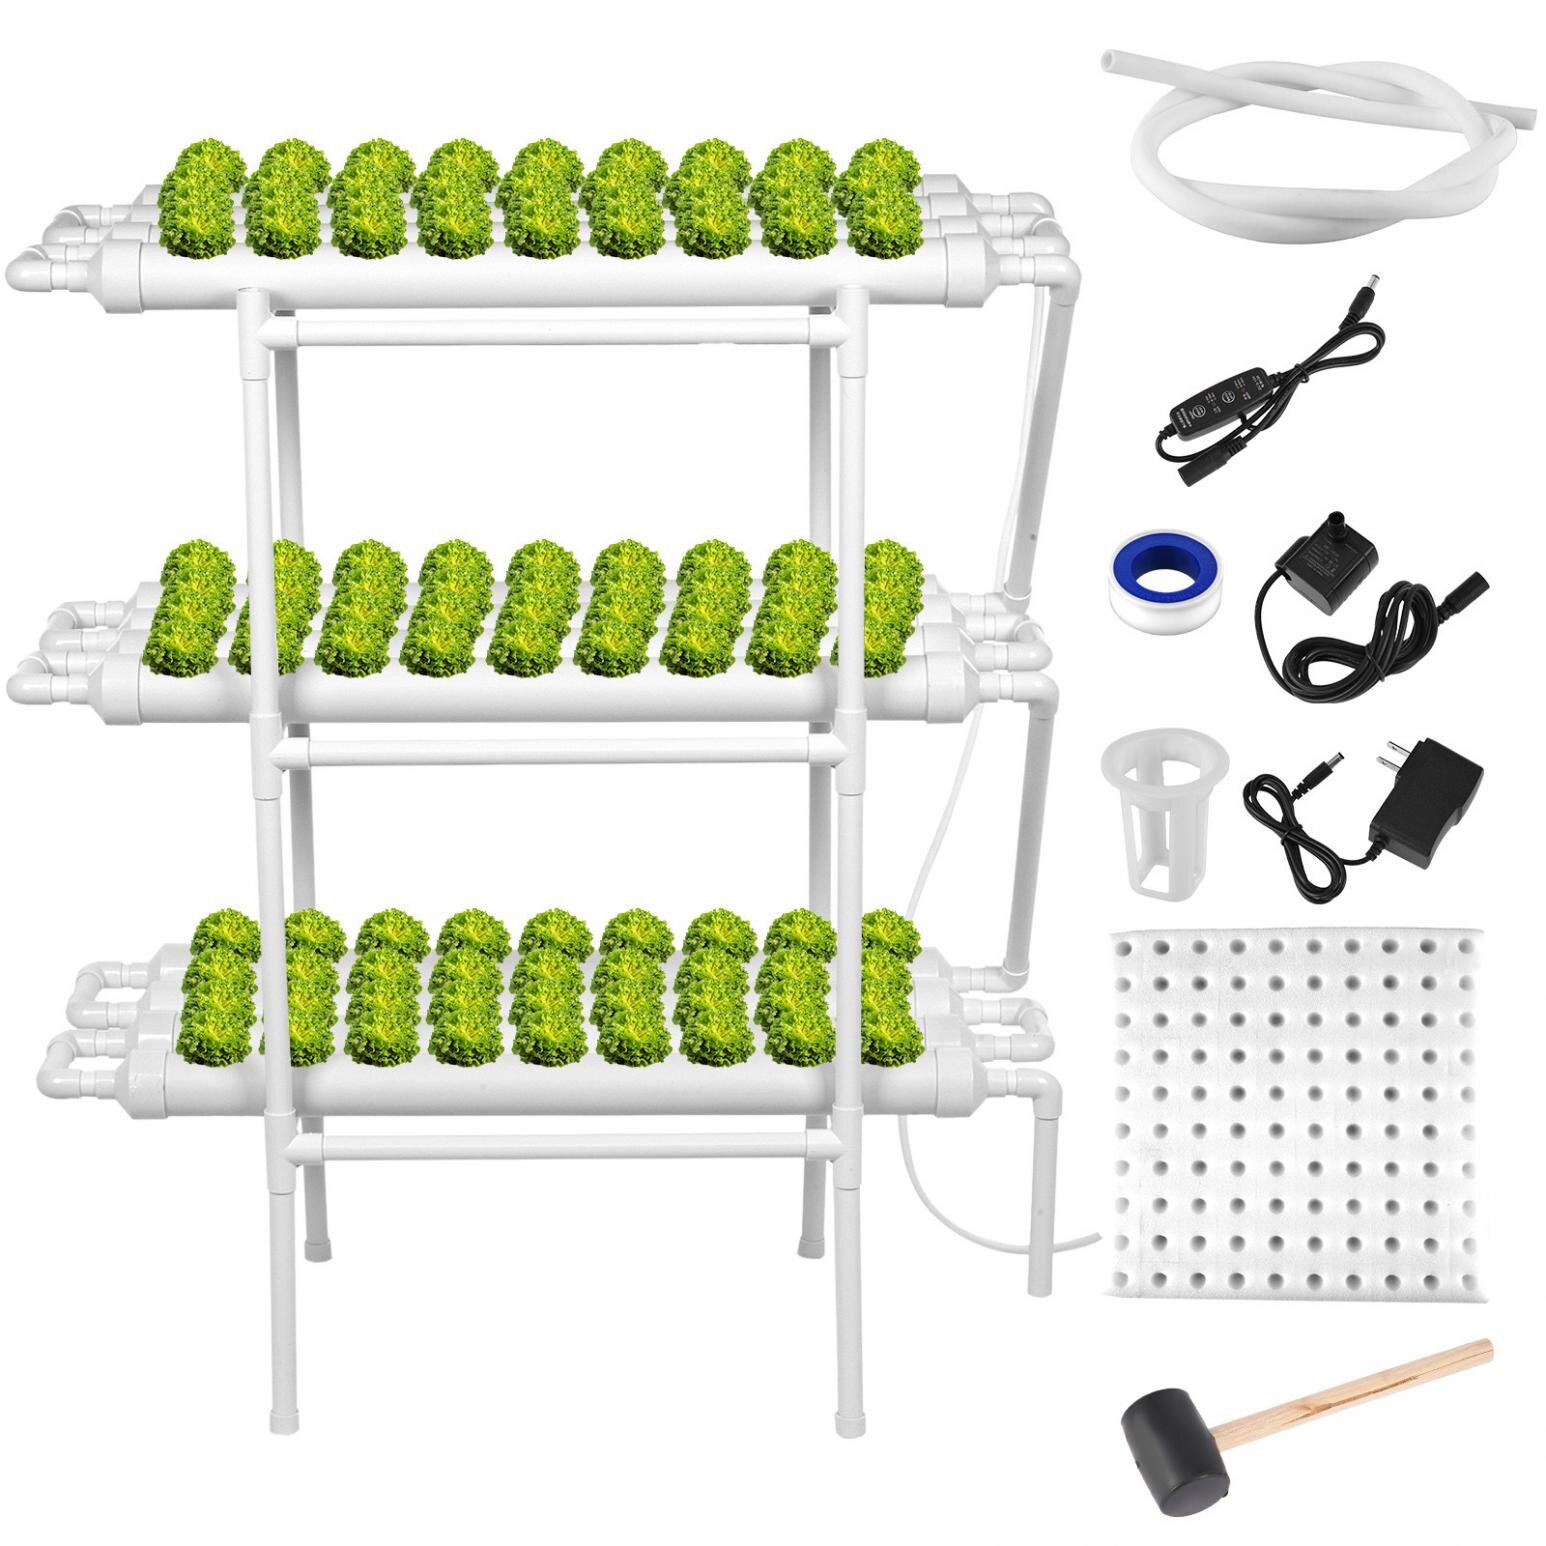 108 Sites Hydroponic Grow Kit 12 Pipes 3 Layers Garden Planting Vegetable Tool 